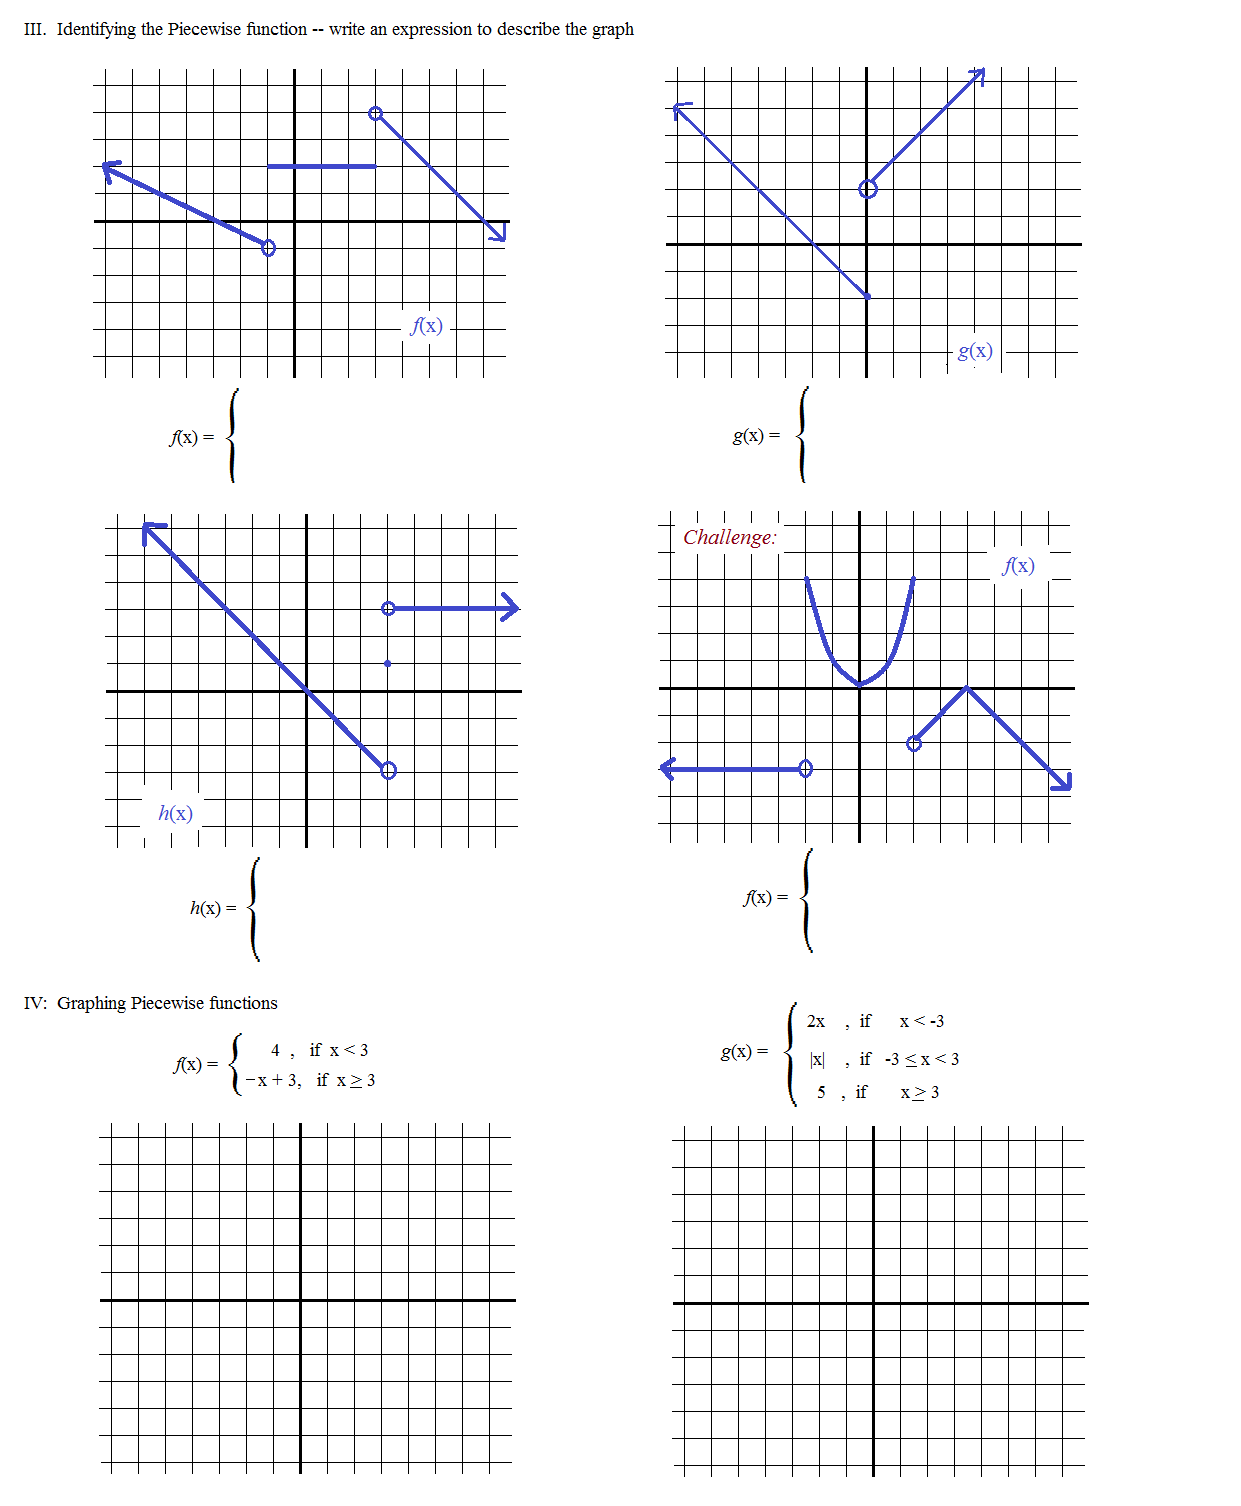 Piecewise Functions Worksheet Answers - Nidecmege With Graphing Piecewise Functions Worksheet